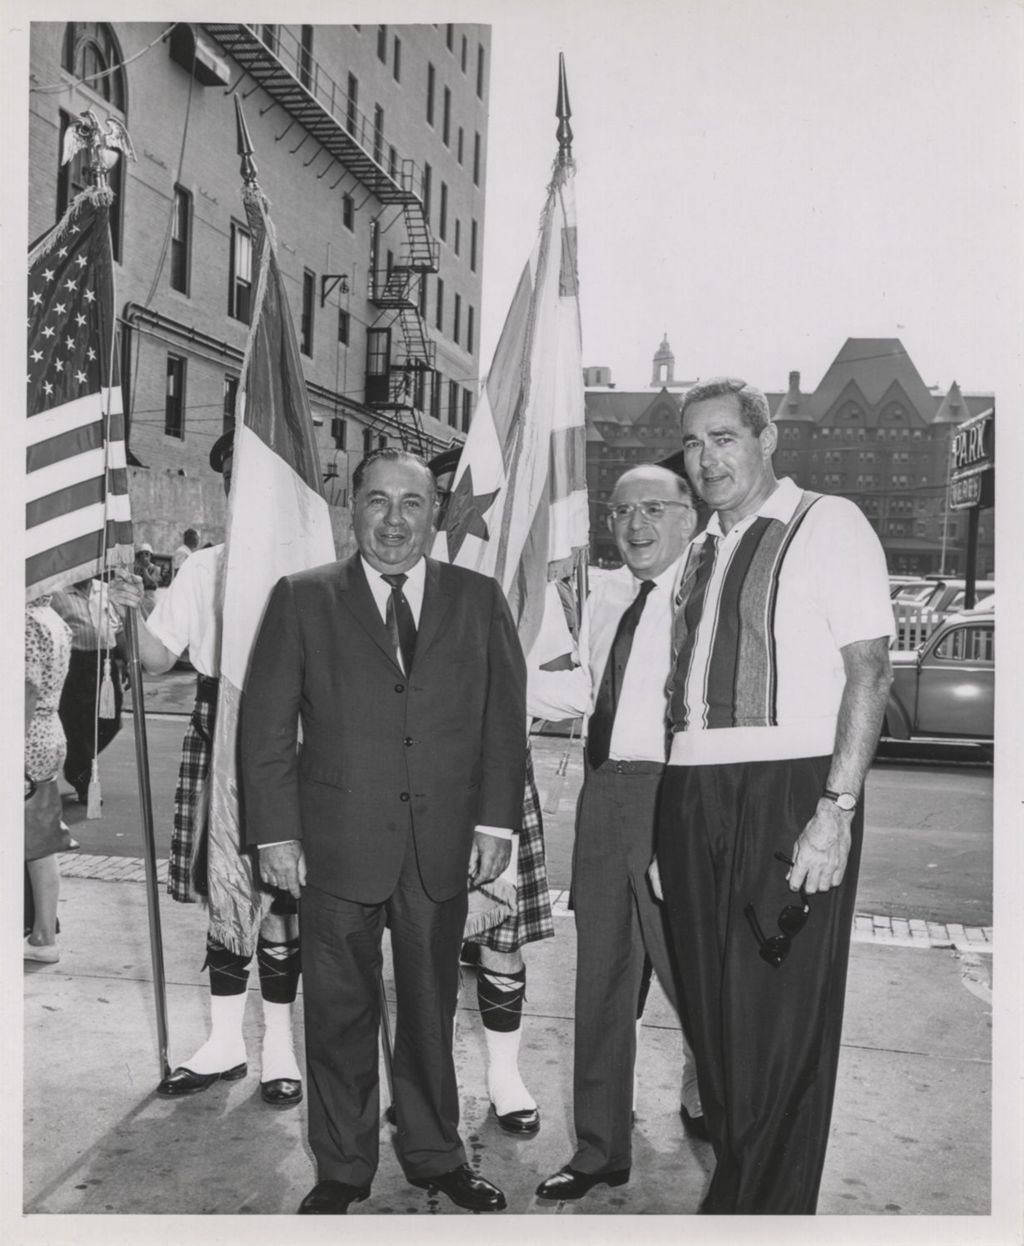 Miniature of Richard J. Daley and two men standing outside